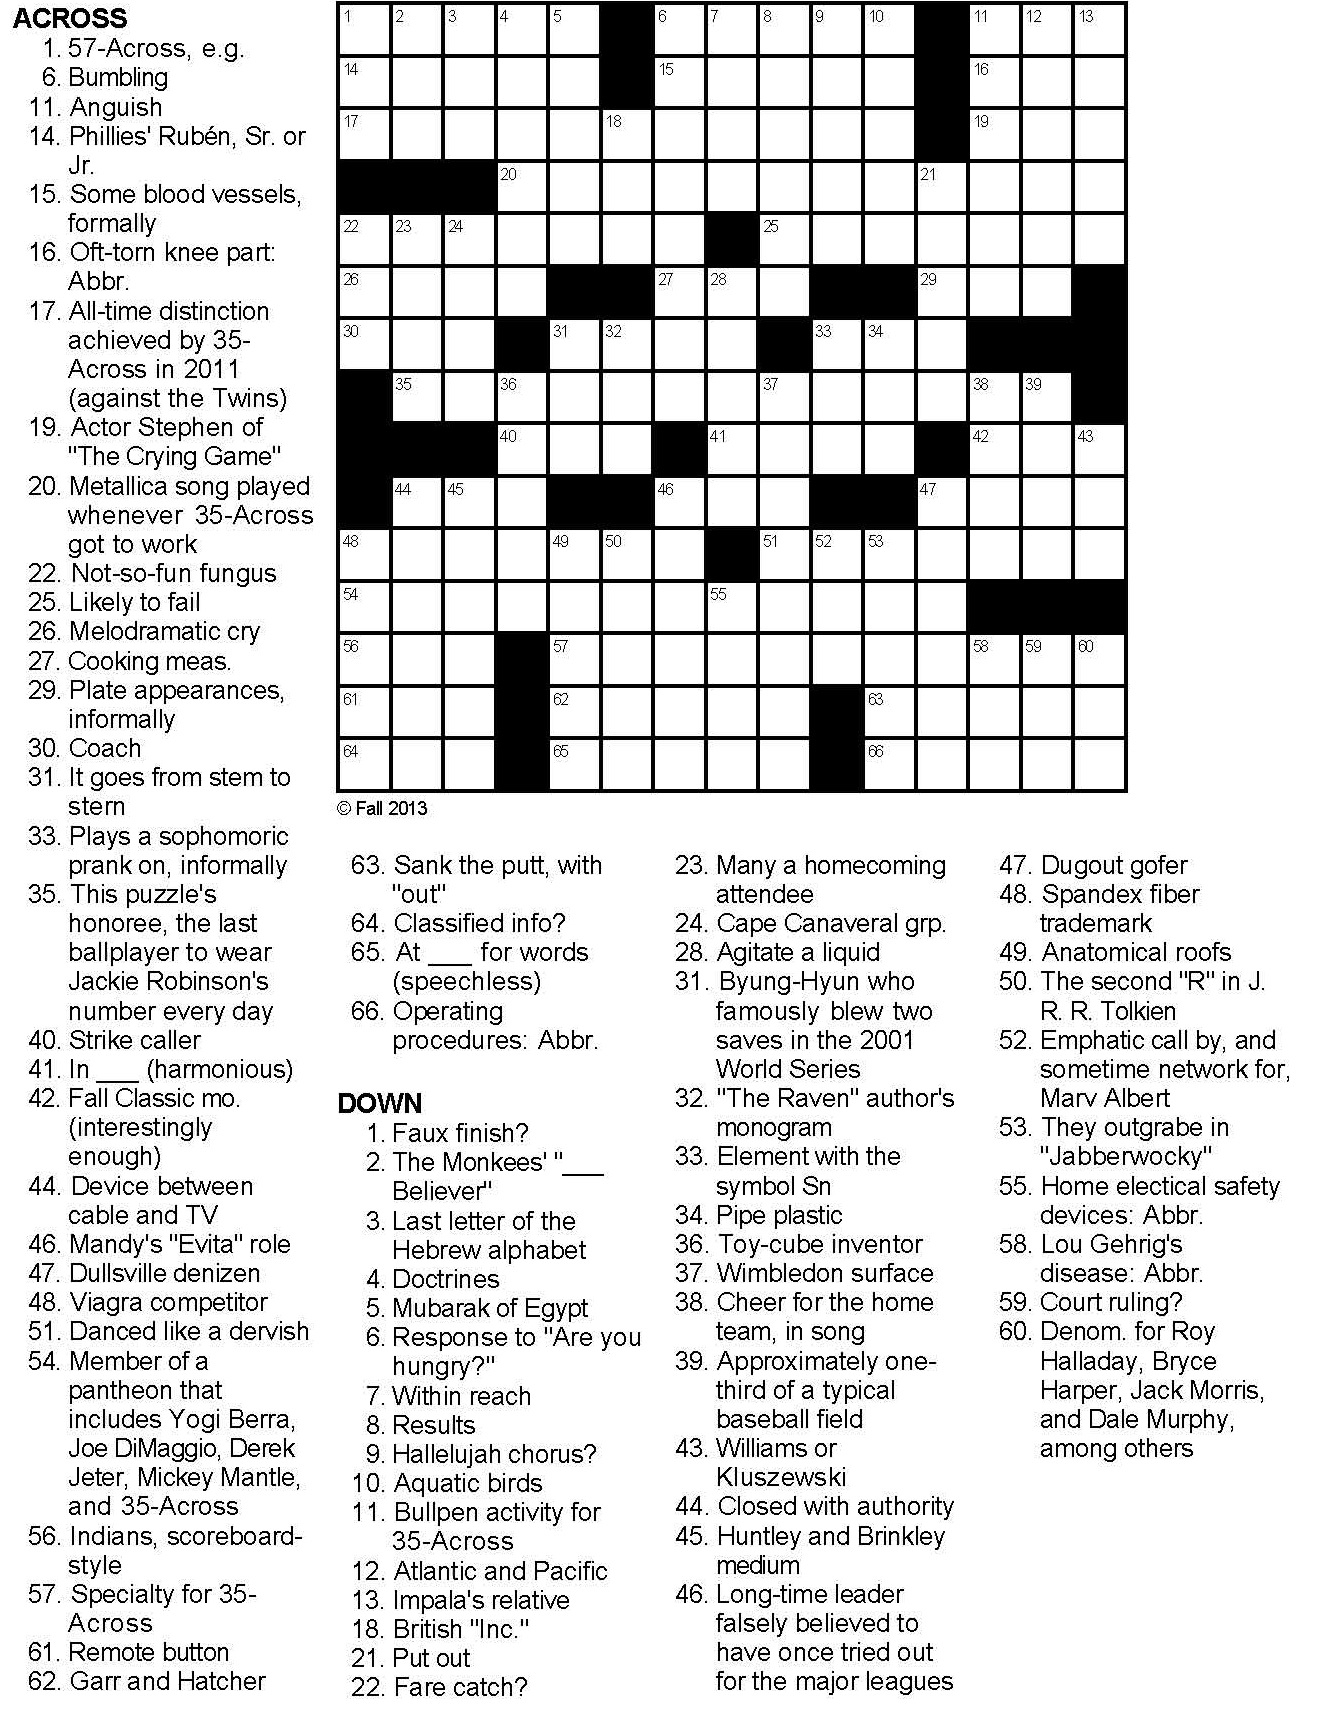 Sports Themed Crossword Puzzles Printable